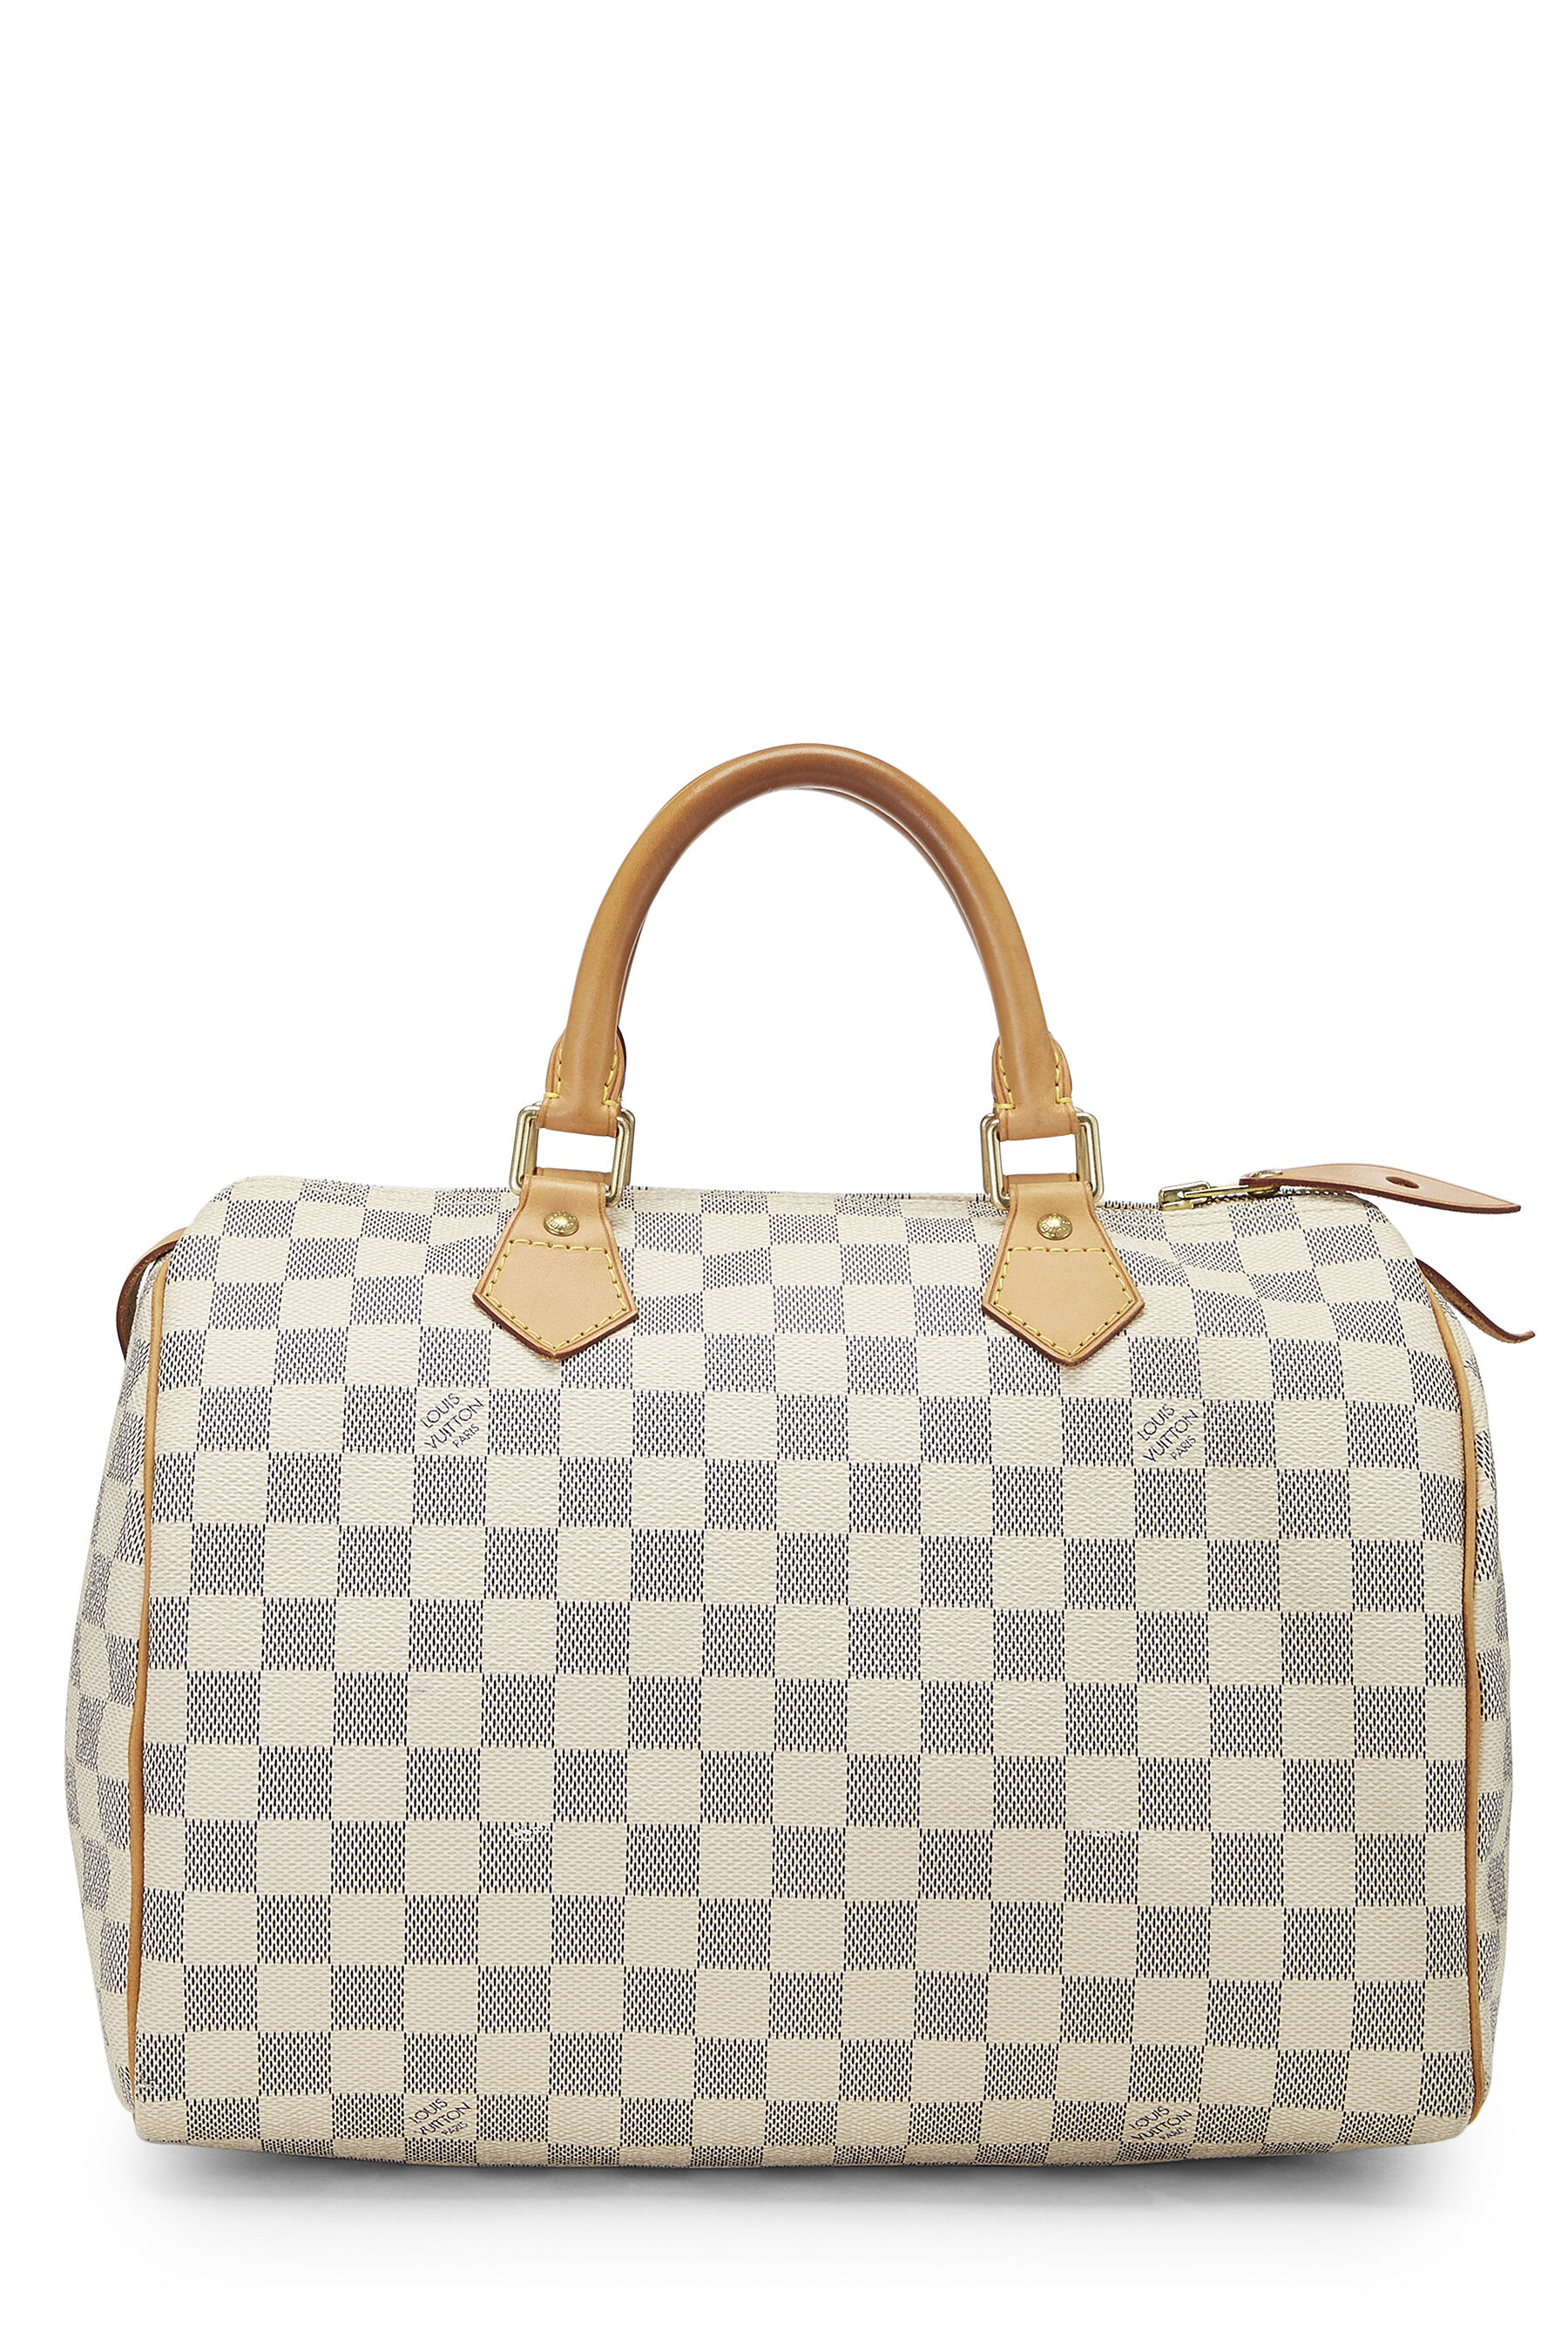 Fake Louis Vuitton luxury bag operation in China worth US$15.4